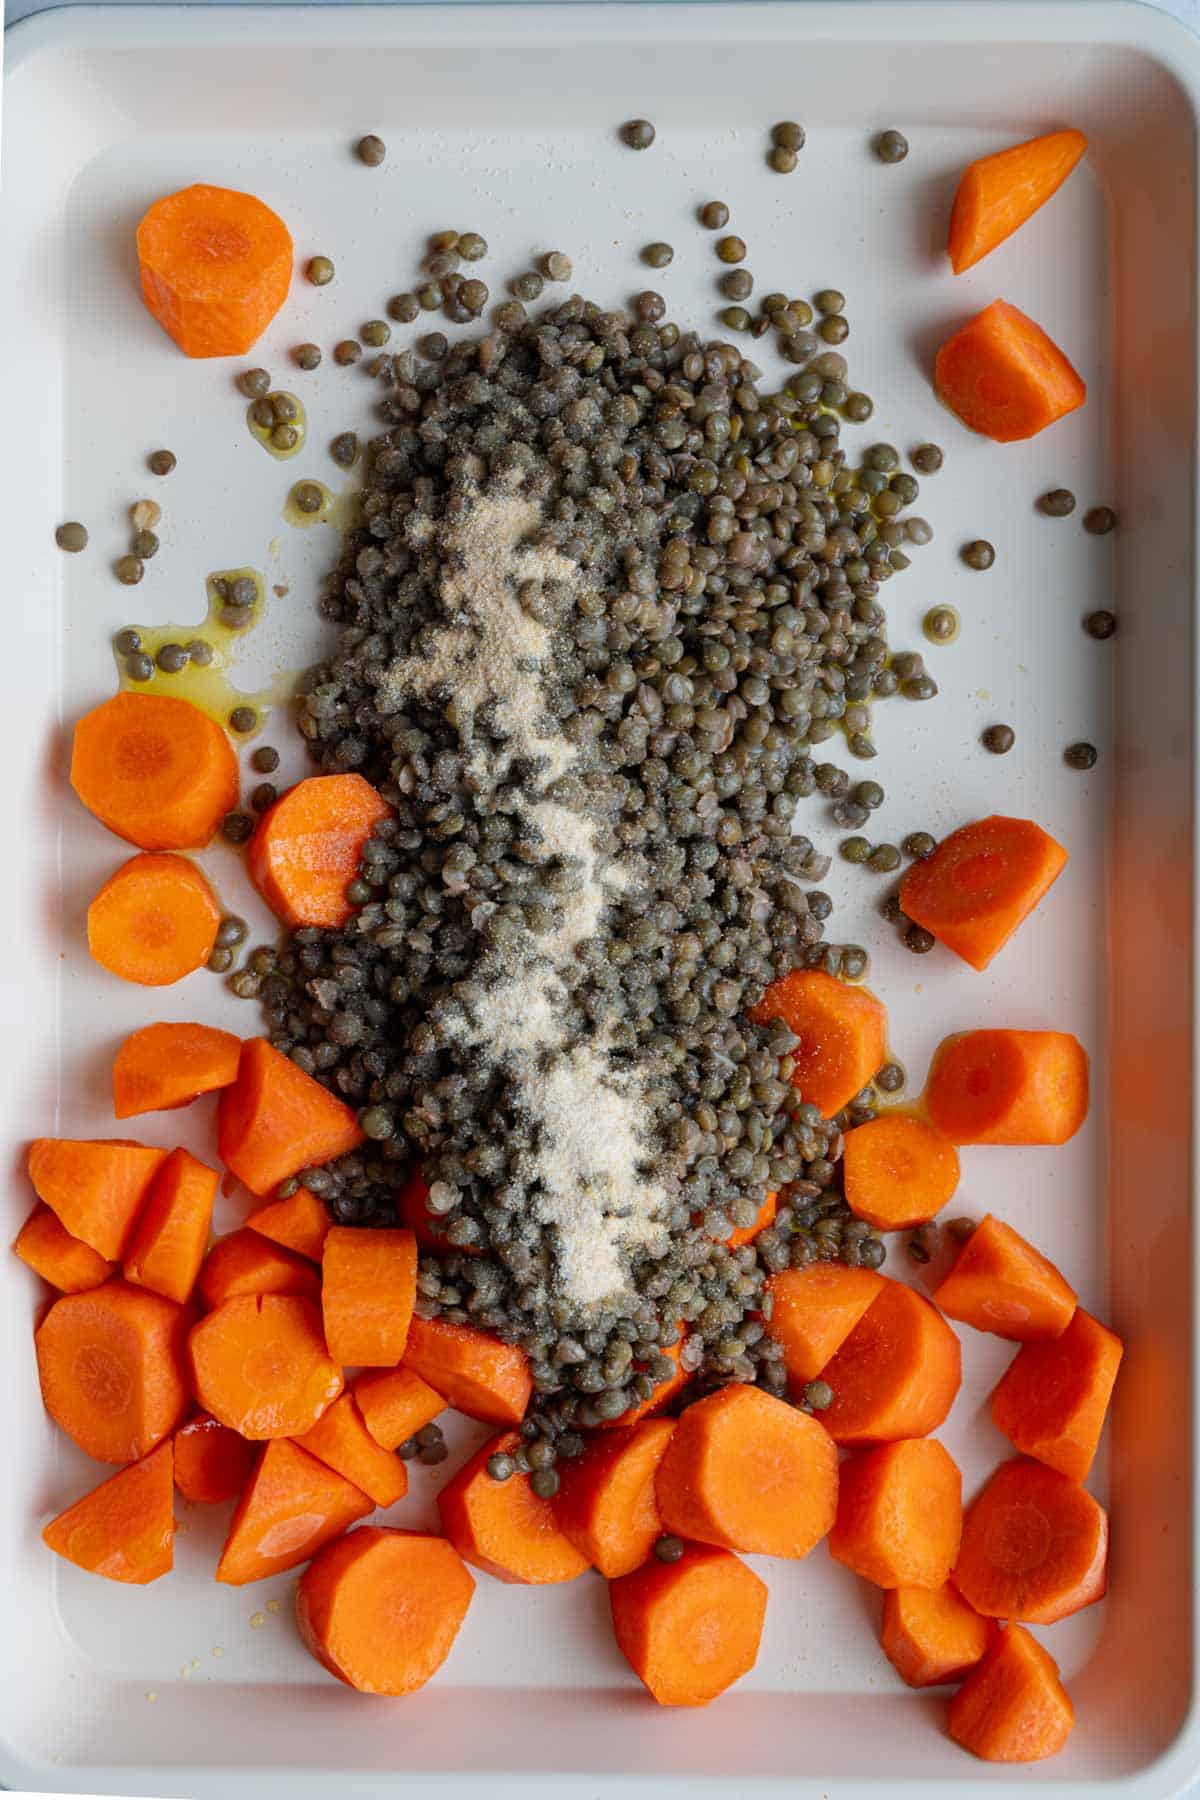 Puy lentils and cut carrot rounds on a white rimmed baking sheet with garlic powder and olive oil.